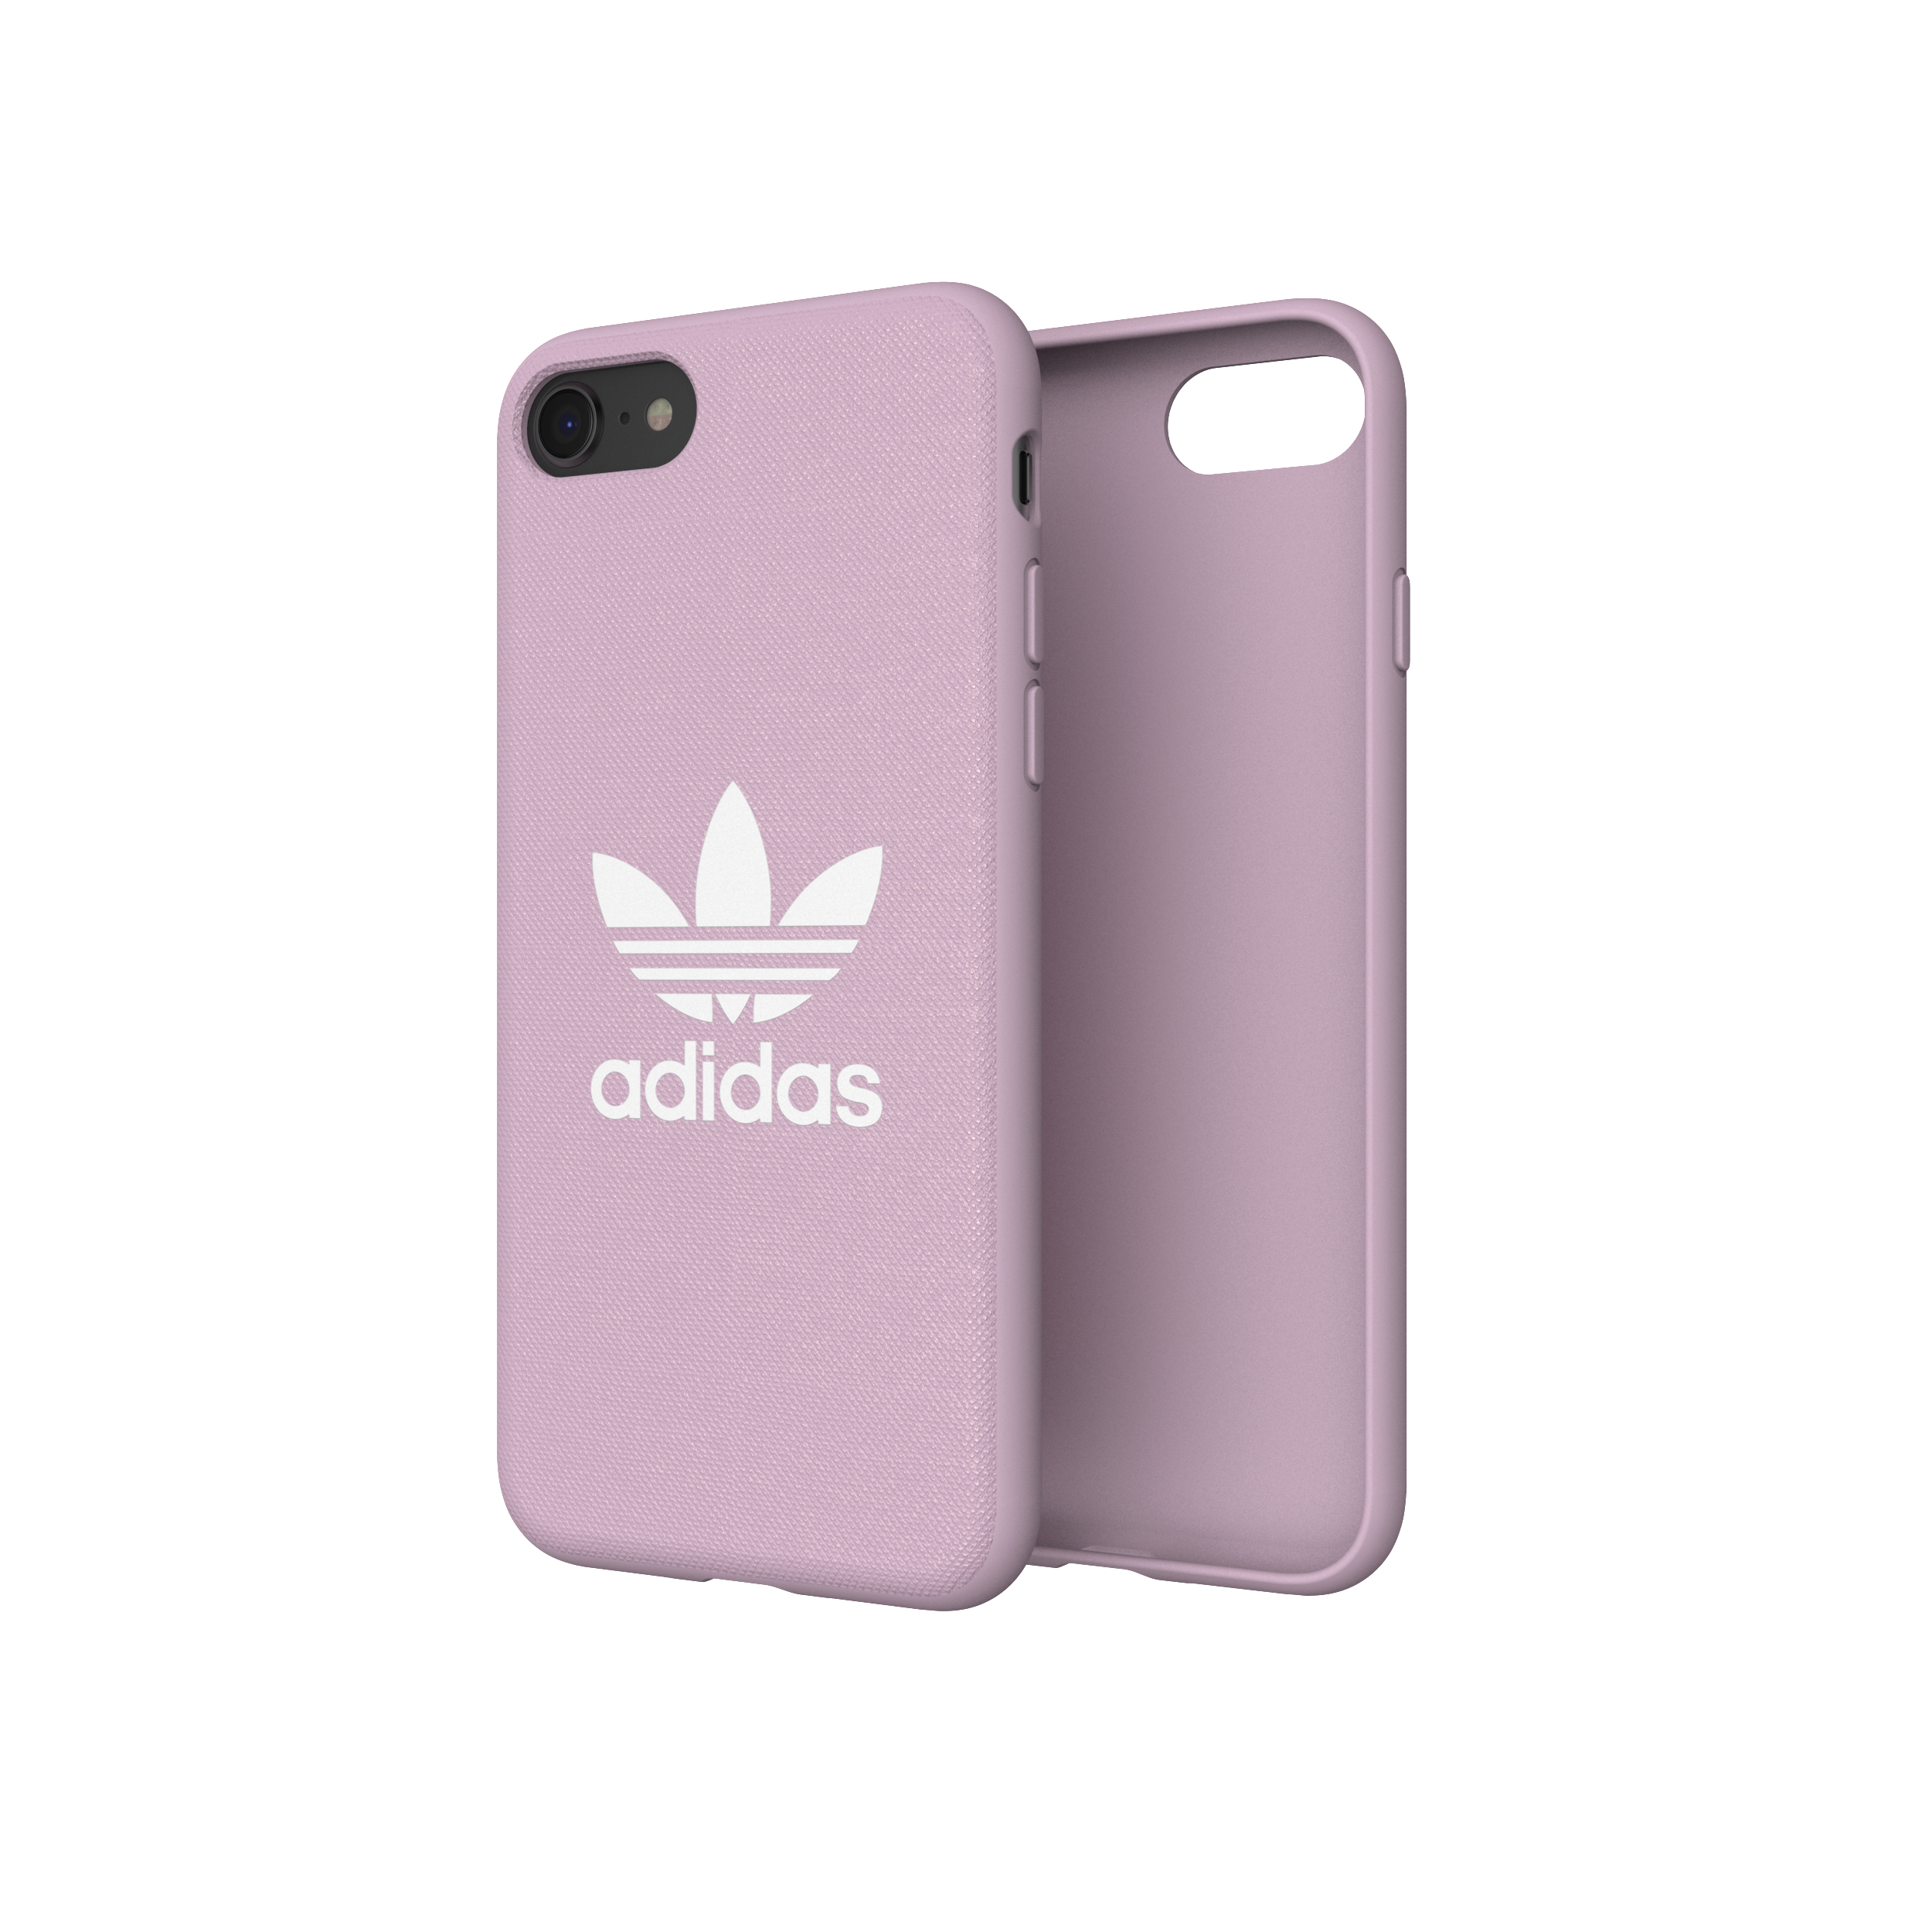 ADIDAS ORIGINALS 6, 7, (2020), Moulded iPhone iPhone SE Apple, iPhone Backcover, 8, iPhone Rosa OR Case